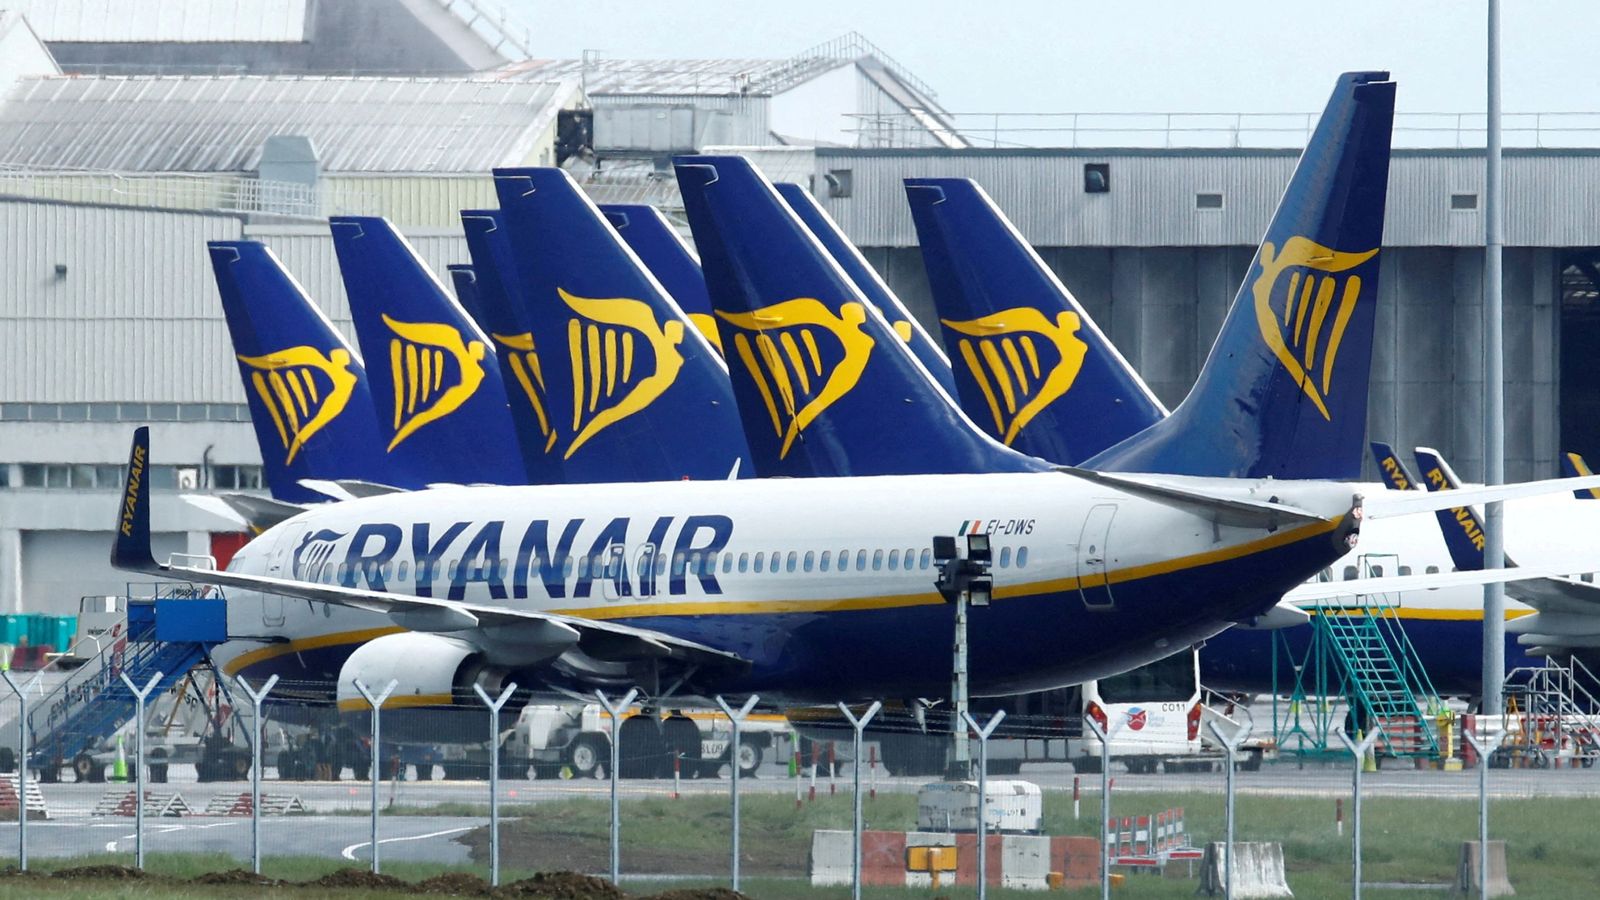 Ryanair warns of rising fuel costs - while reporting profit in first quarter